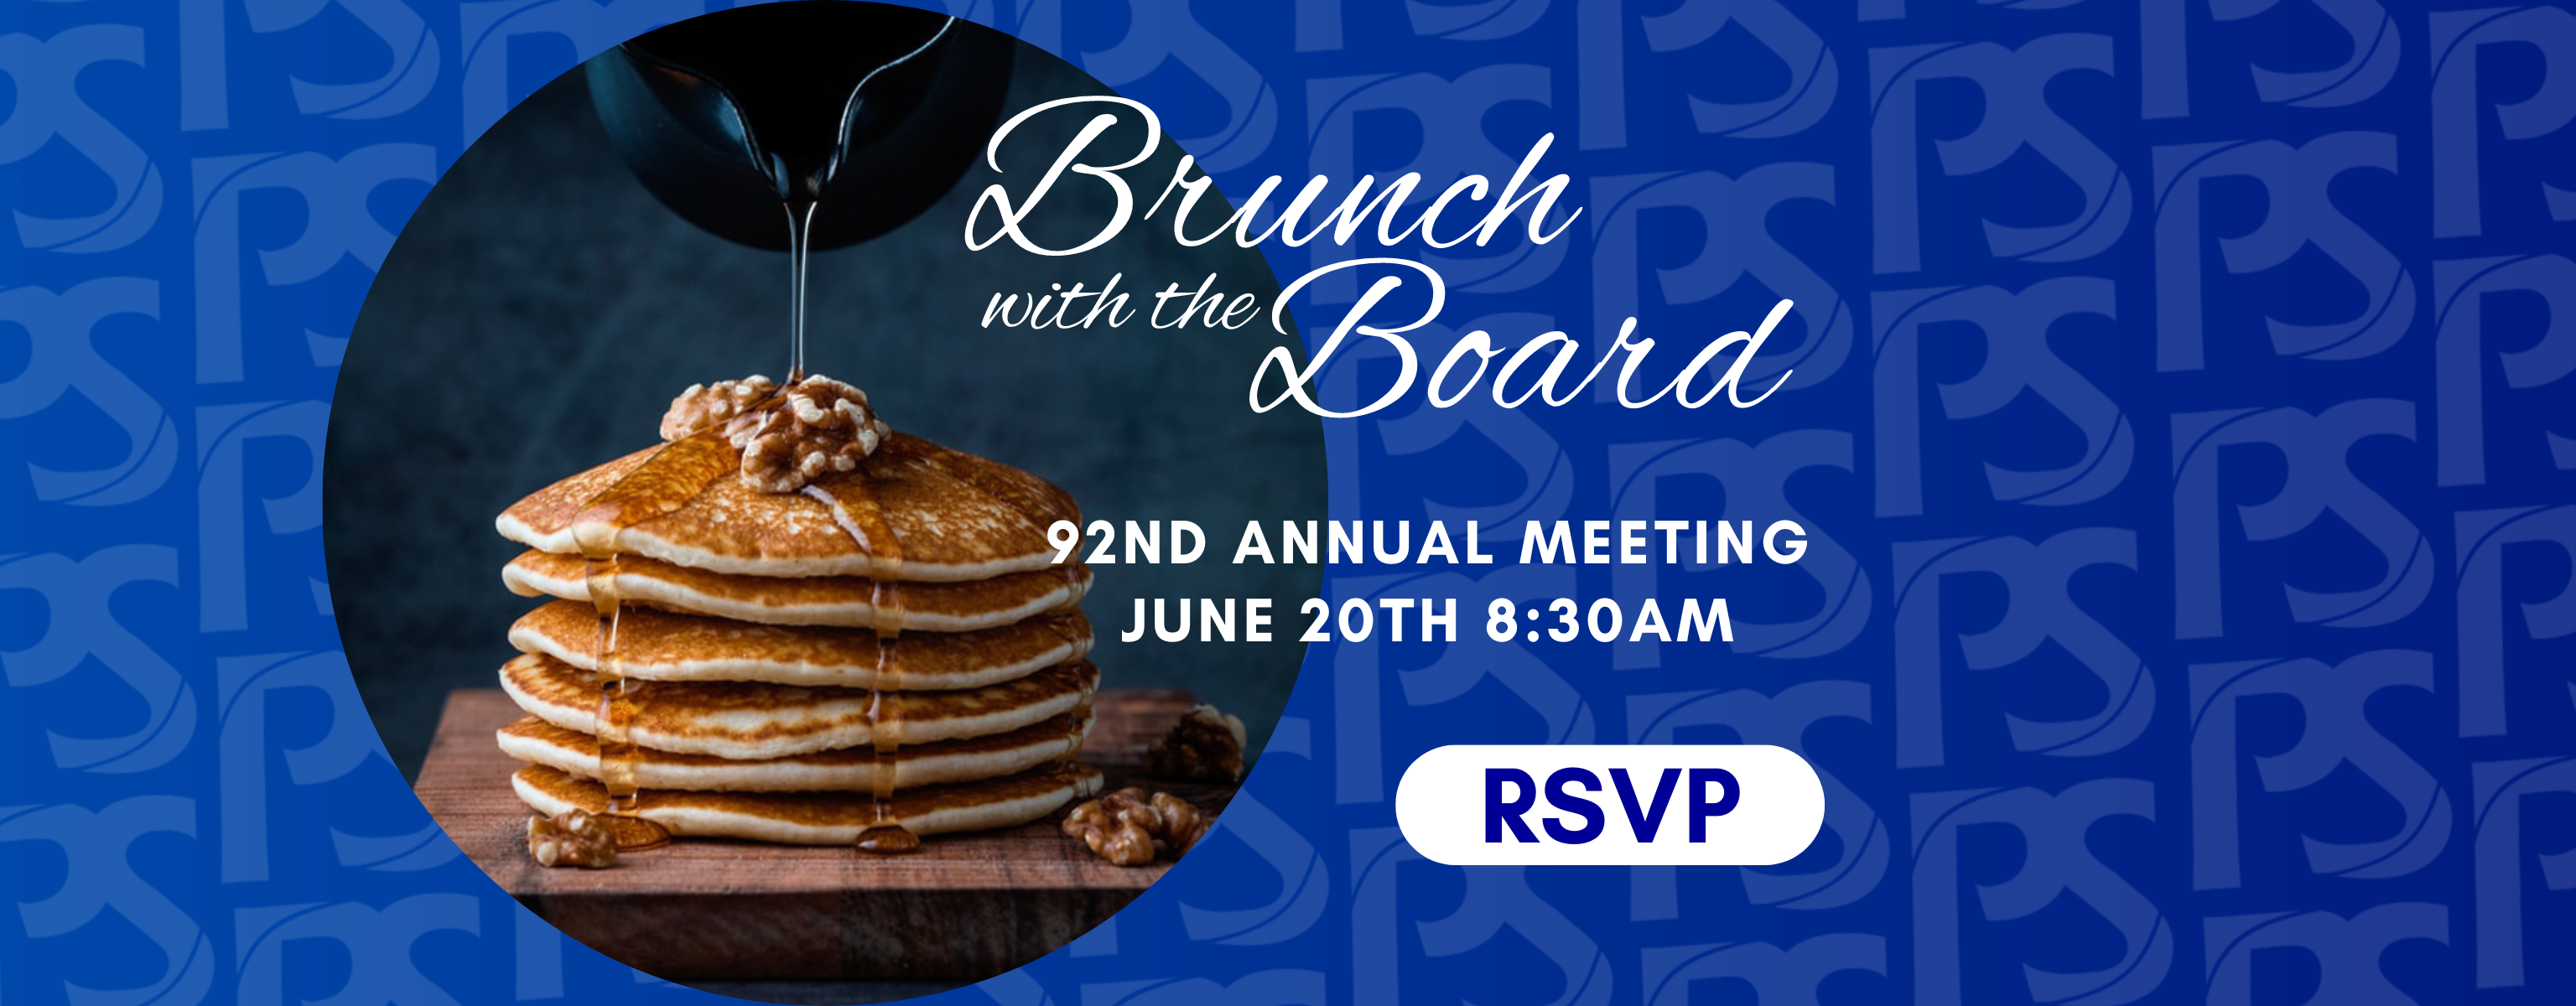 Brunch with the Board- 92nd Annual Meeting June 20th at 8:30AM Click to RSVP